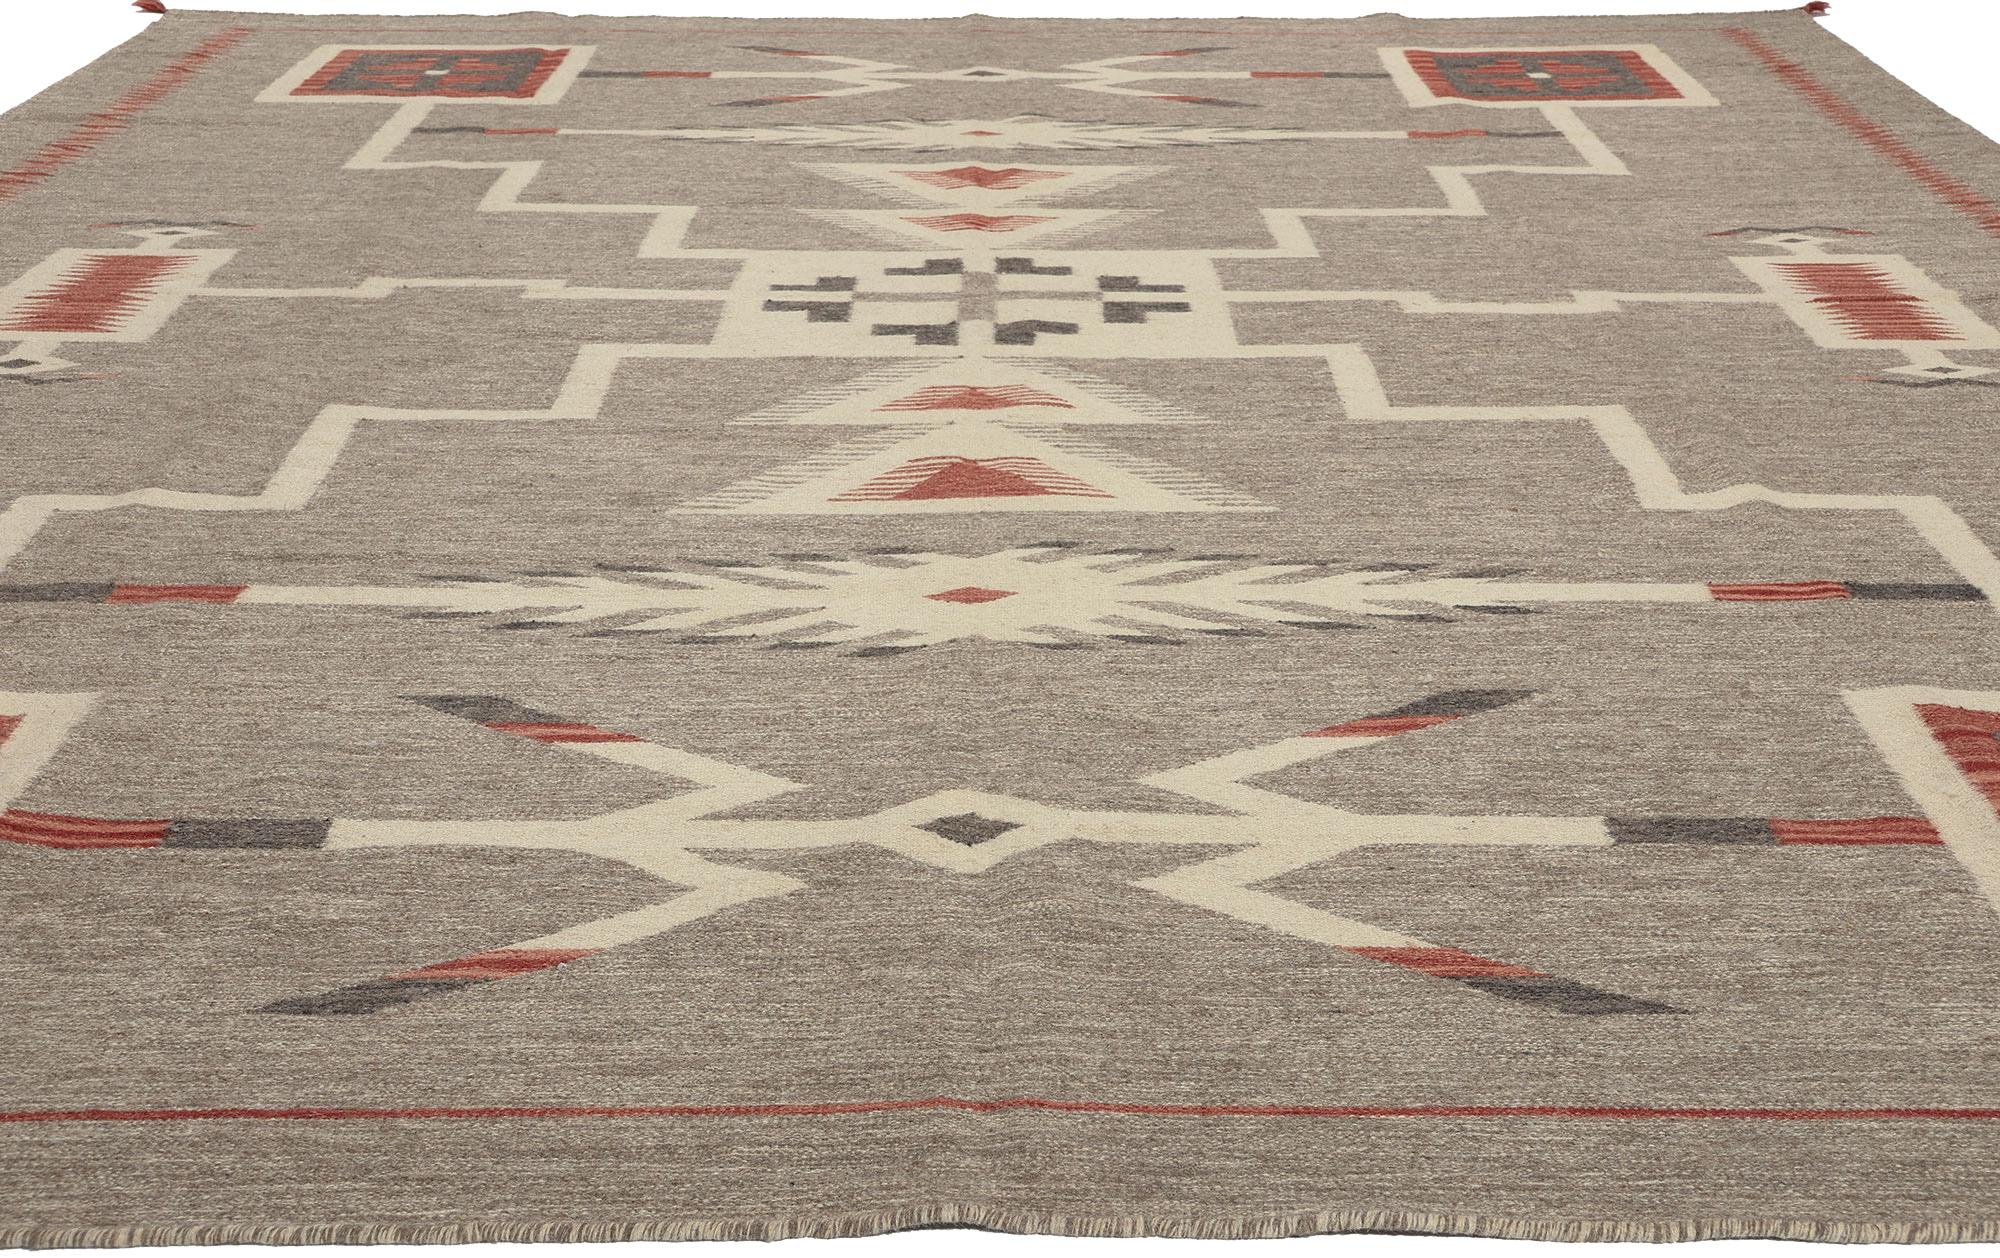 South Asian Contemporary Santa Fe Southwest Modern Navajo-Style Rug with Storm Pattern For Sale